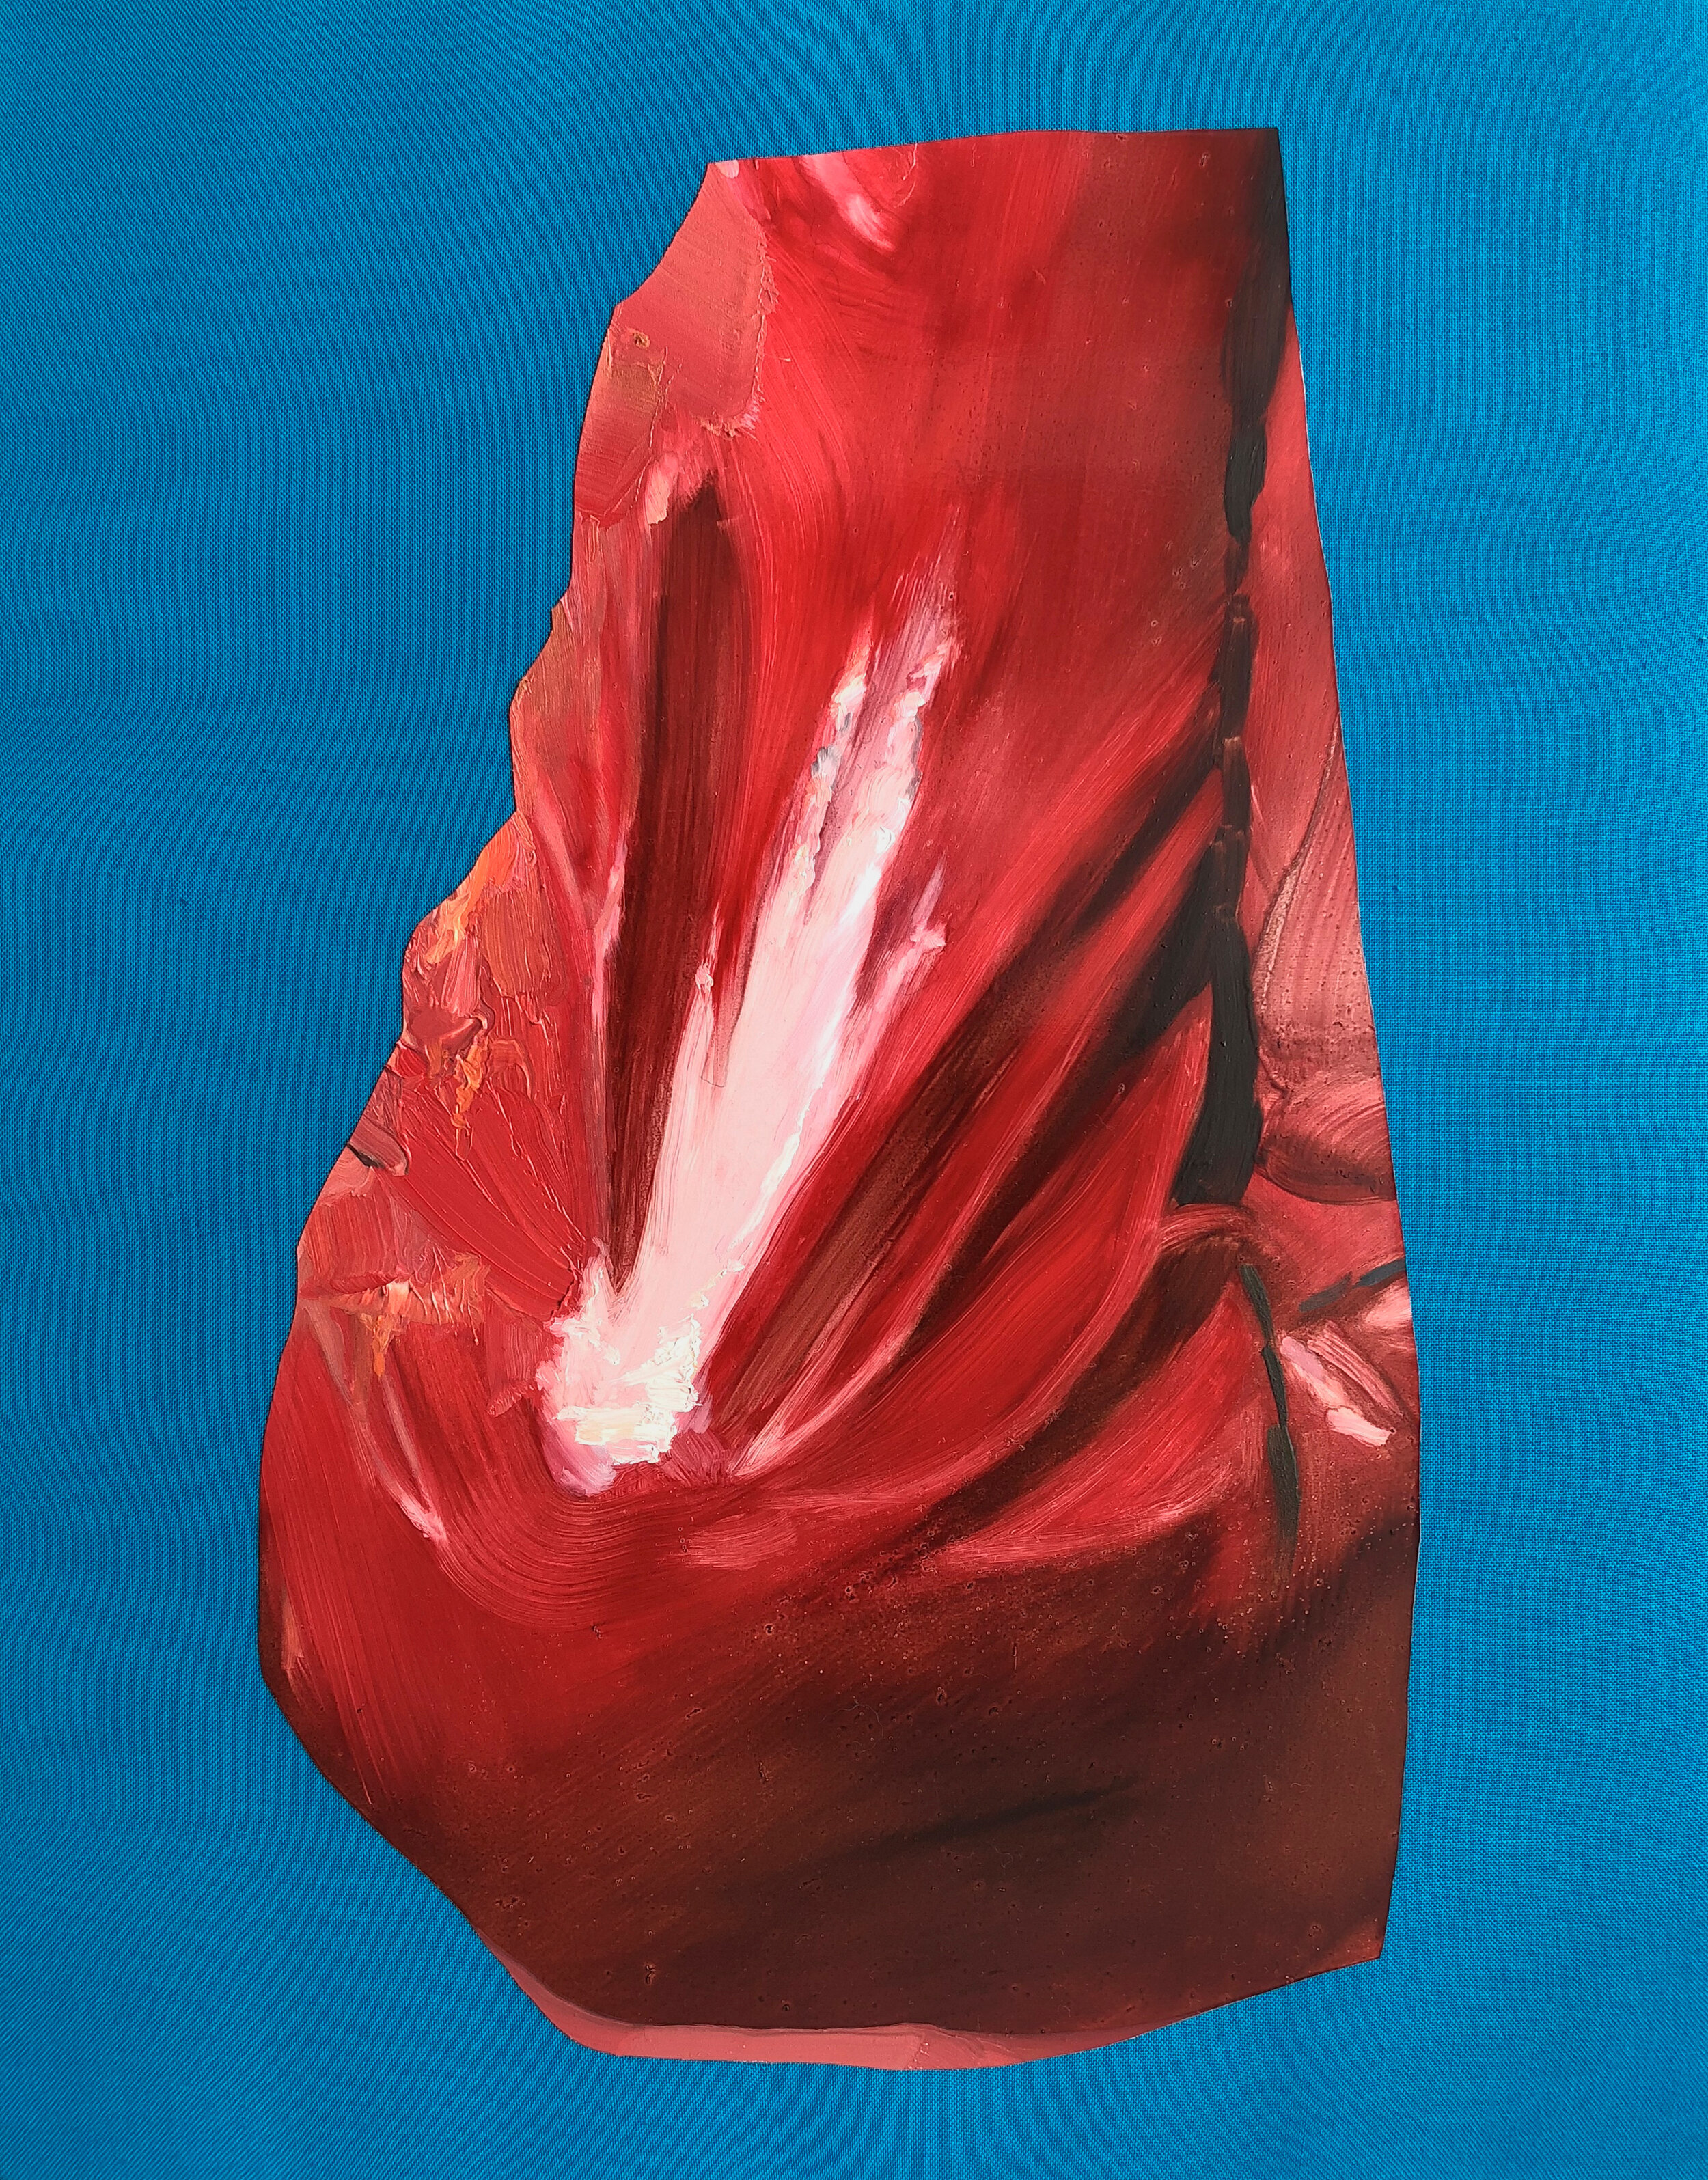  Red, 2018, oil on canvas, 11” x 14”. 